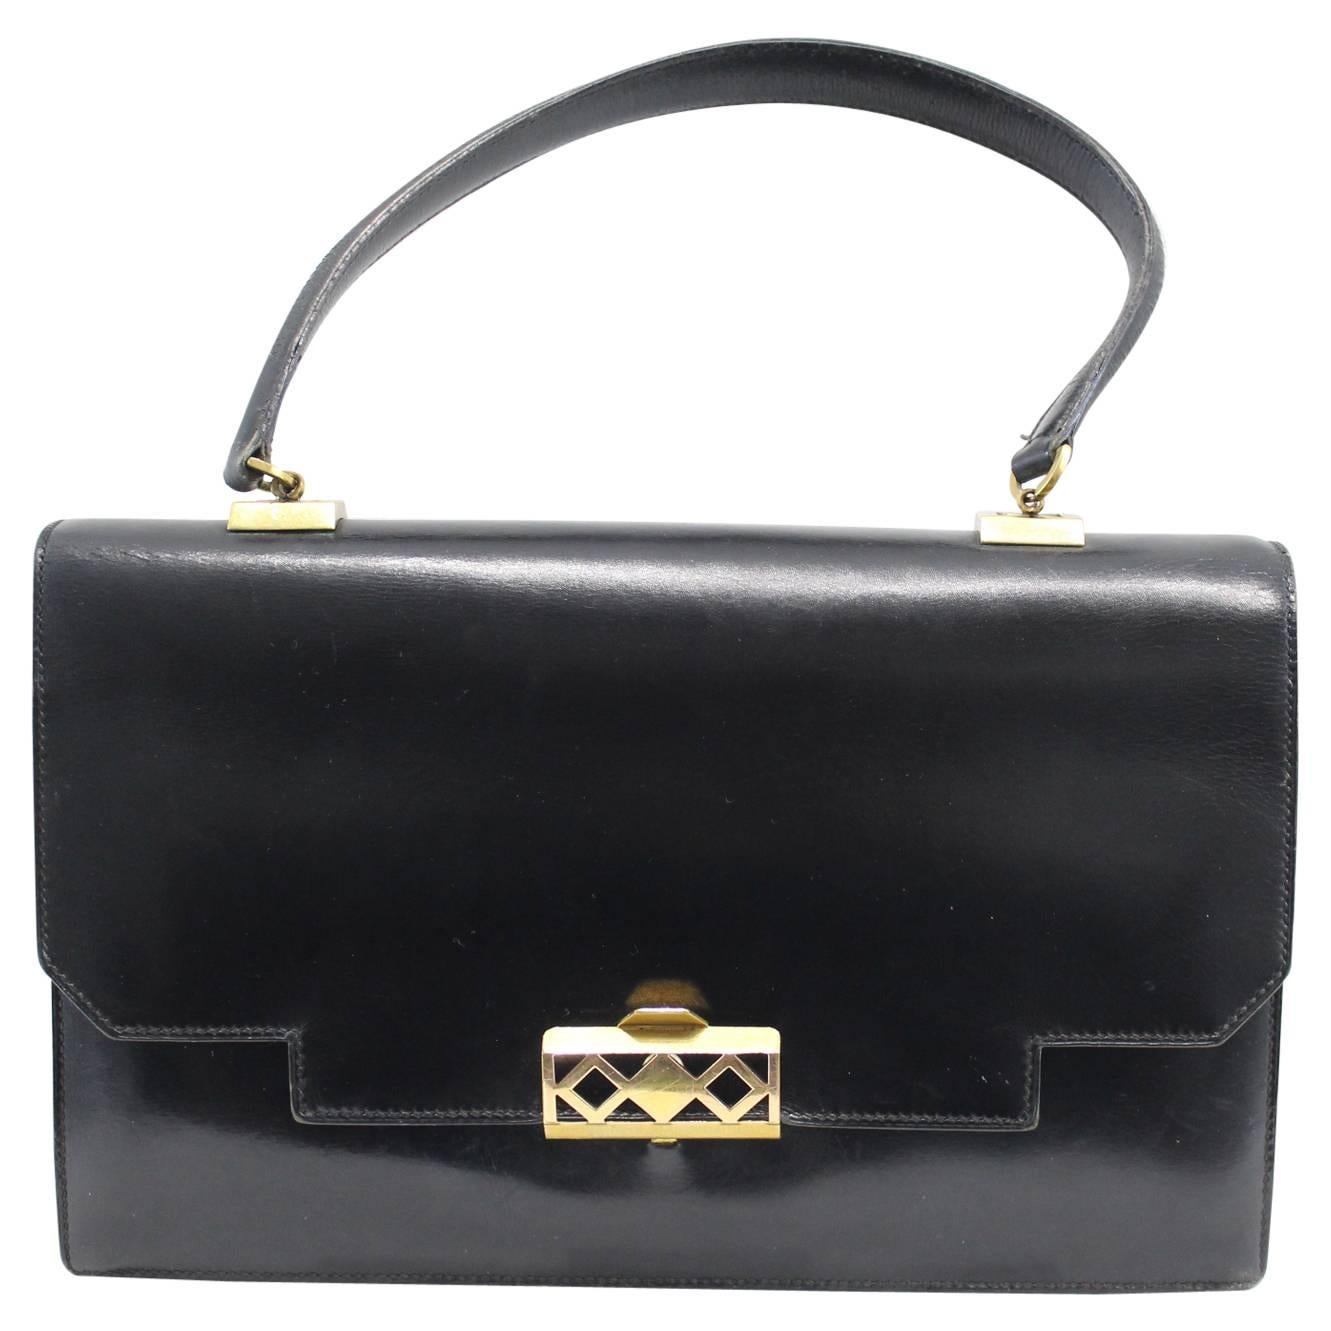 Hermes "Grille" Bag in black box leather, gold-plated hardware